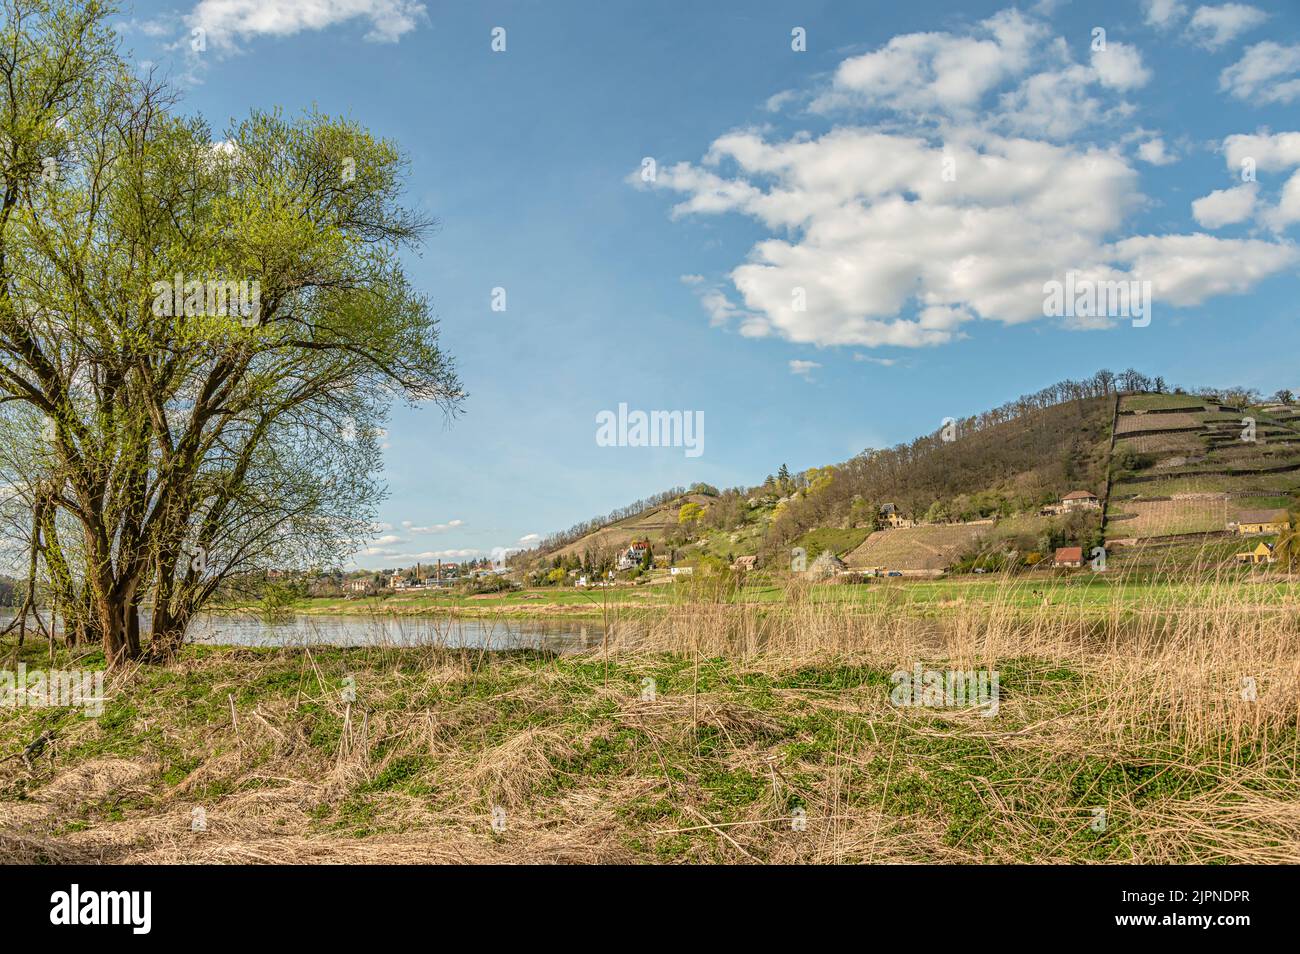 Vineyards at the Spaargebirge in the Elbe Valley near Meissen, Saxony, Germany Stock Photo